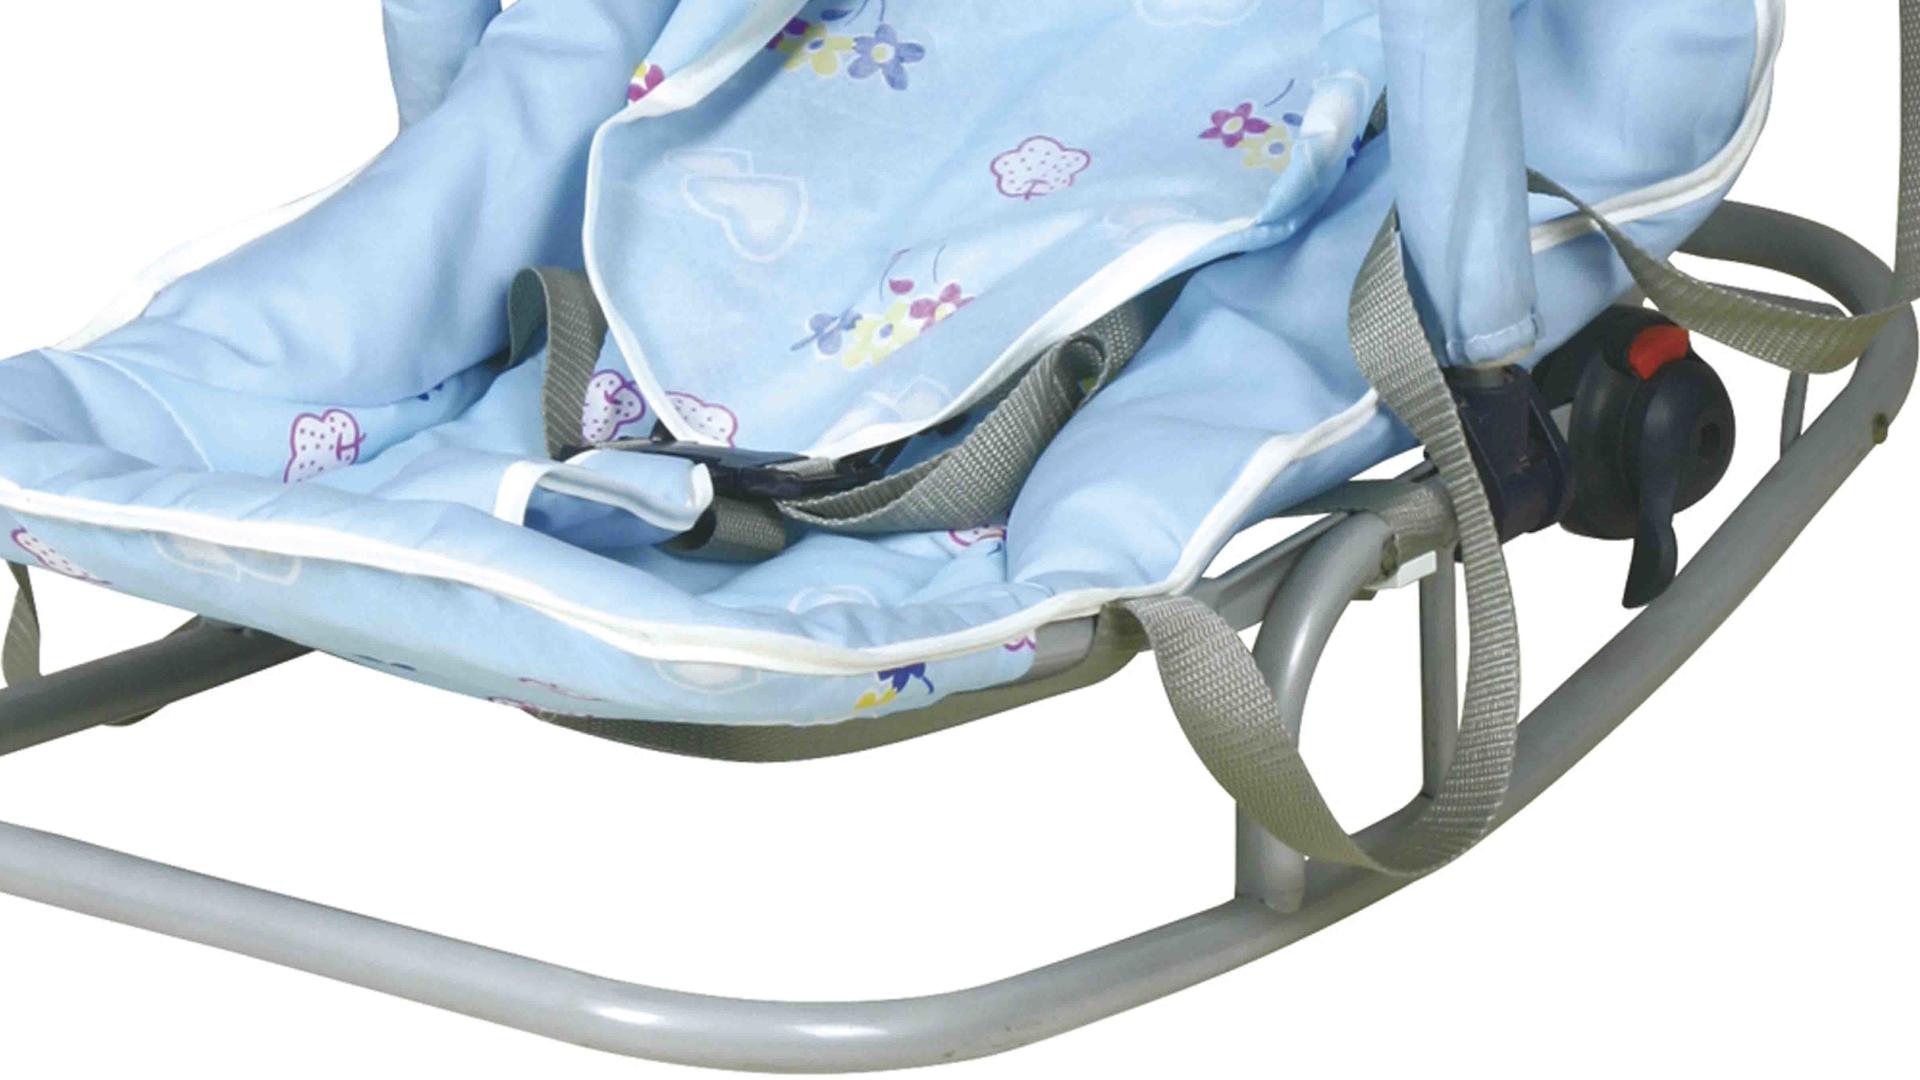 Aoqi foldable baby bouncer price personalized for infant